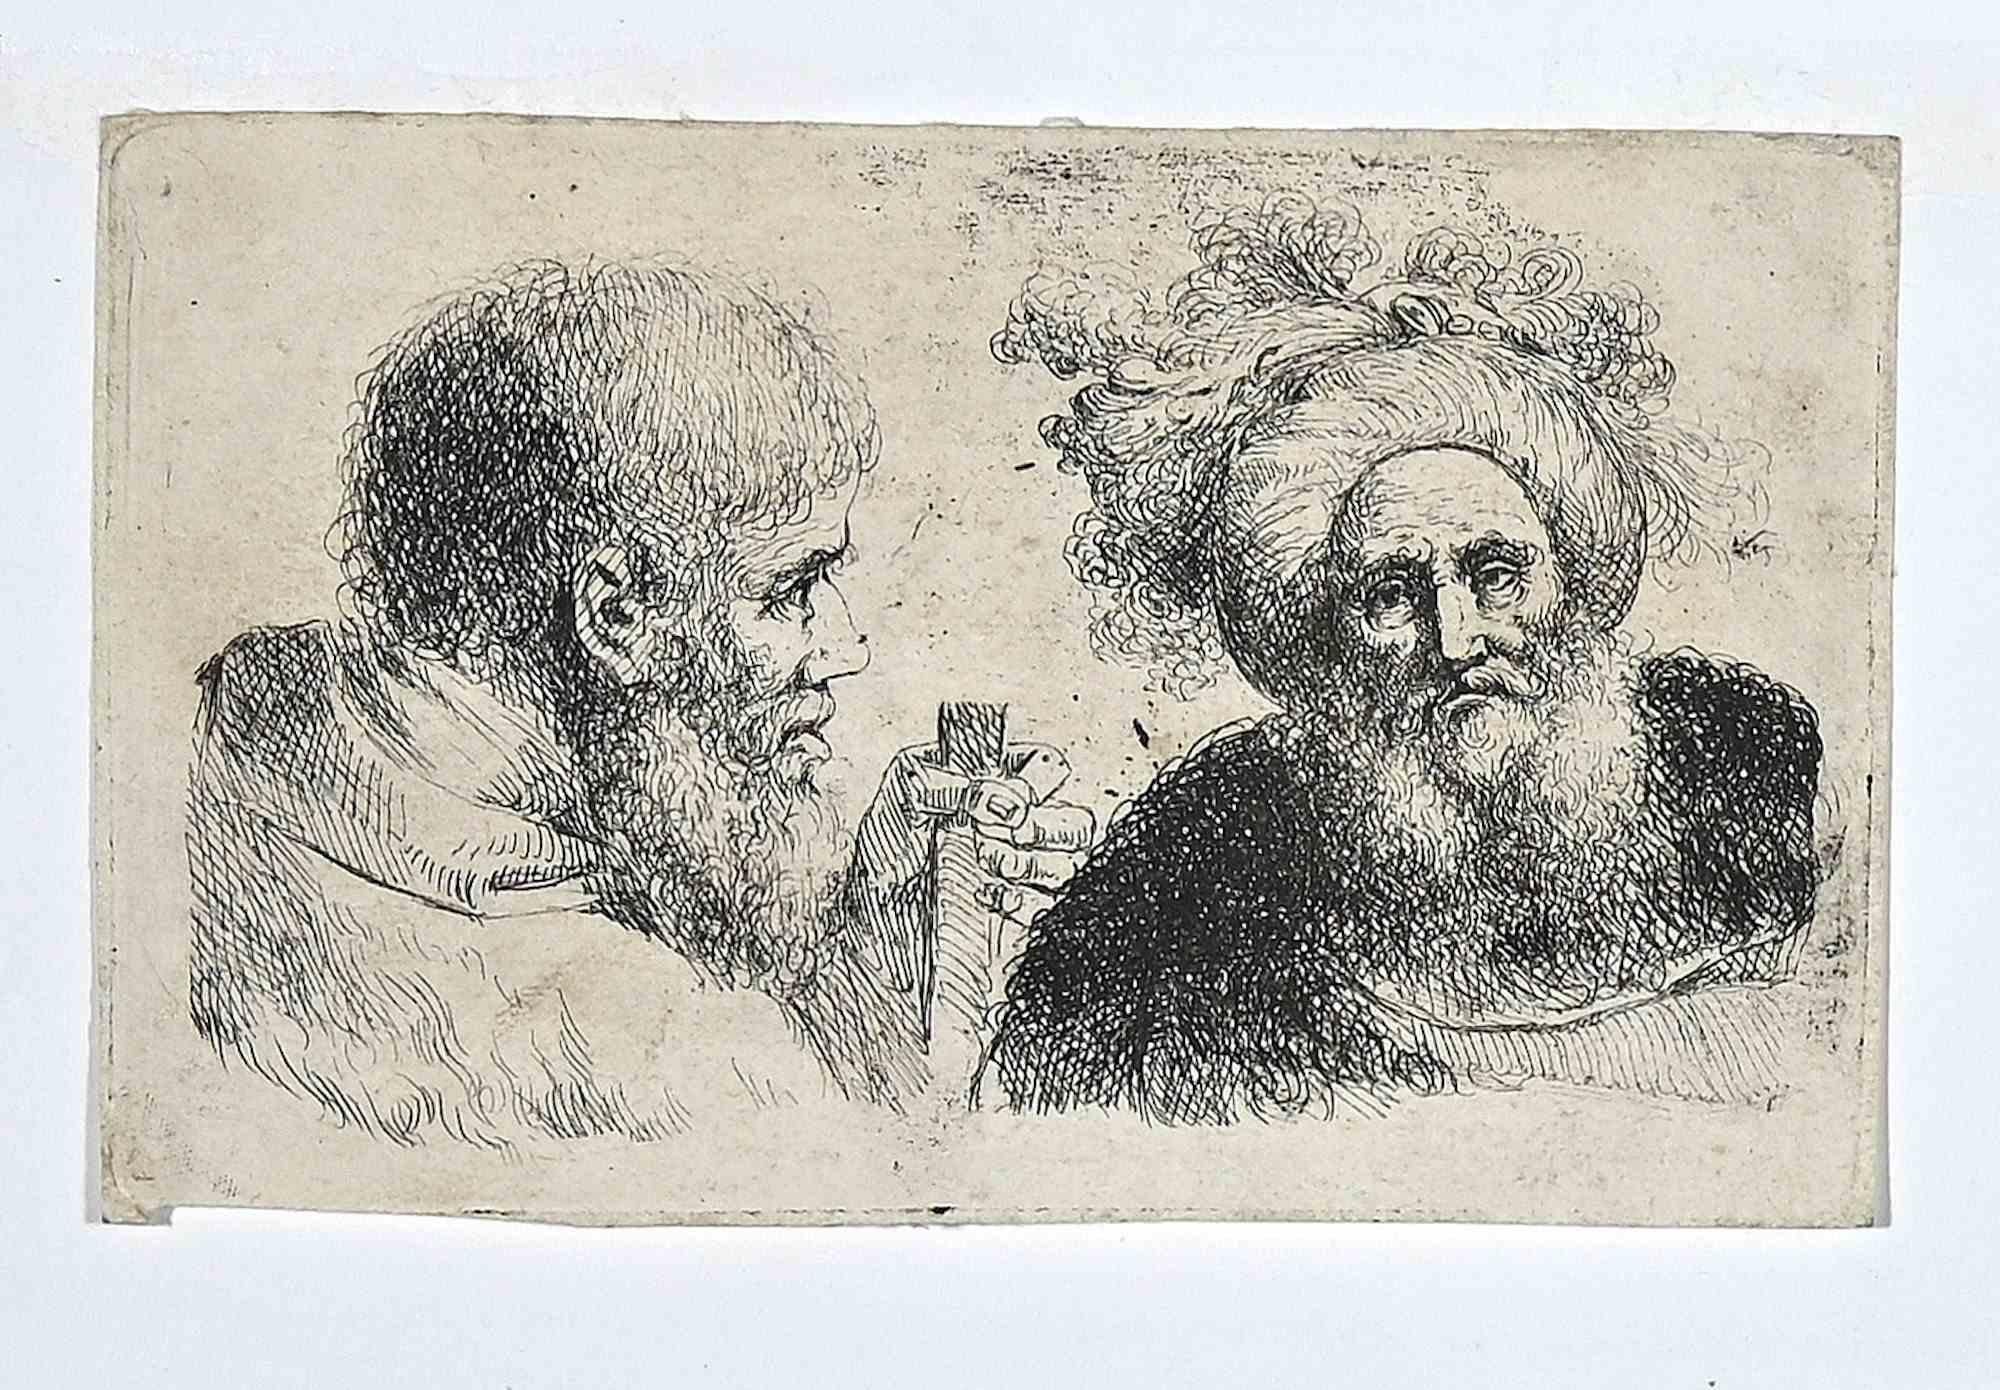 Unknown Figurative Print - Characters - Original Etching - 18th Century